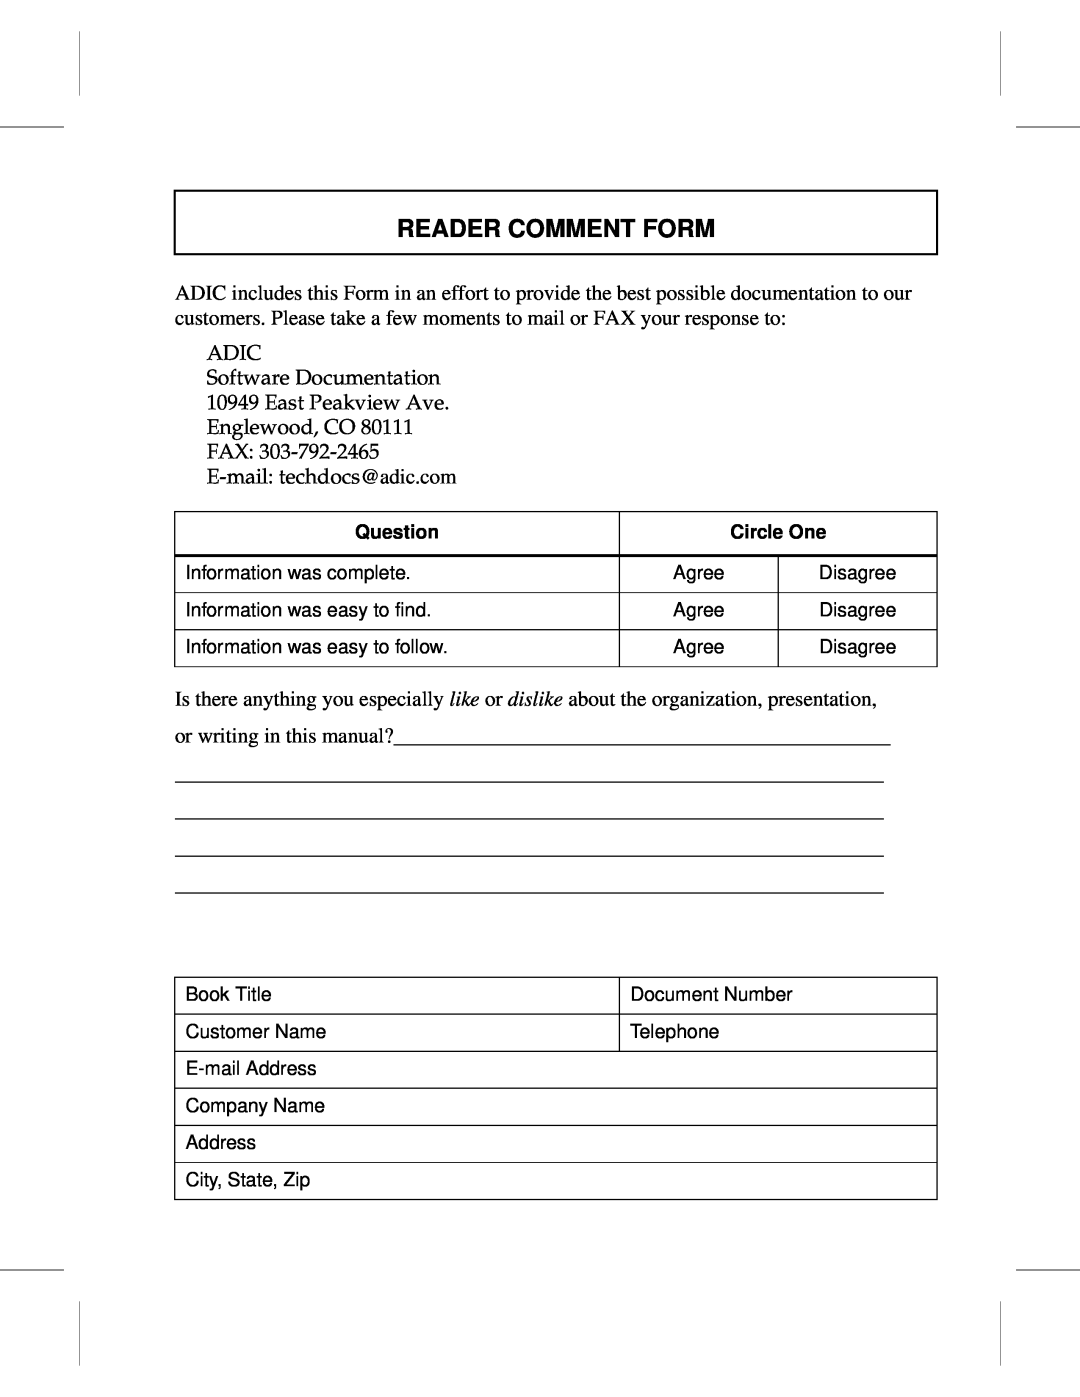 ADIC 601356 manual Reader Comment Form 